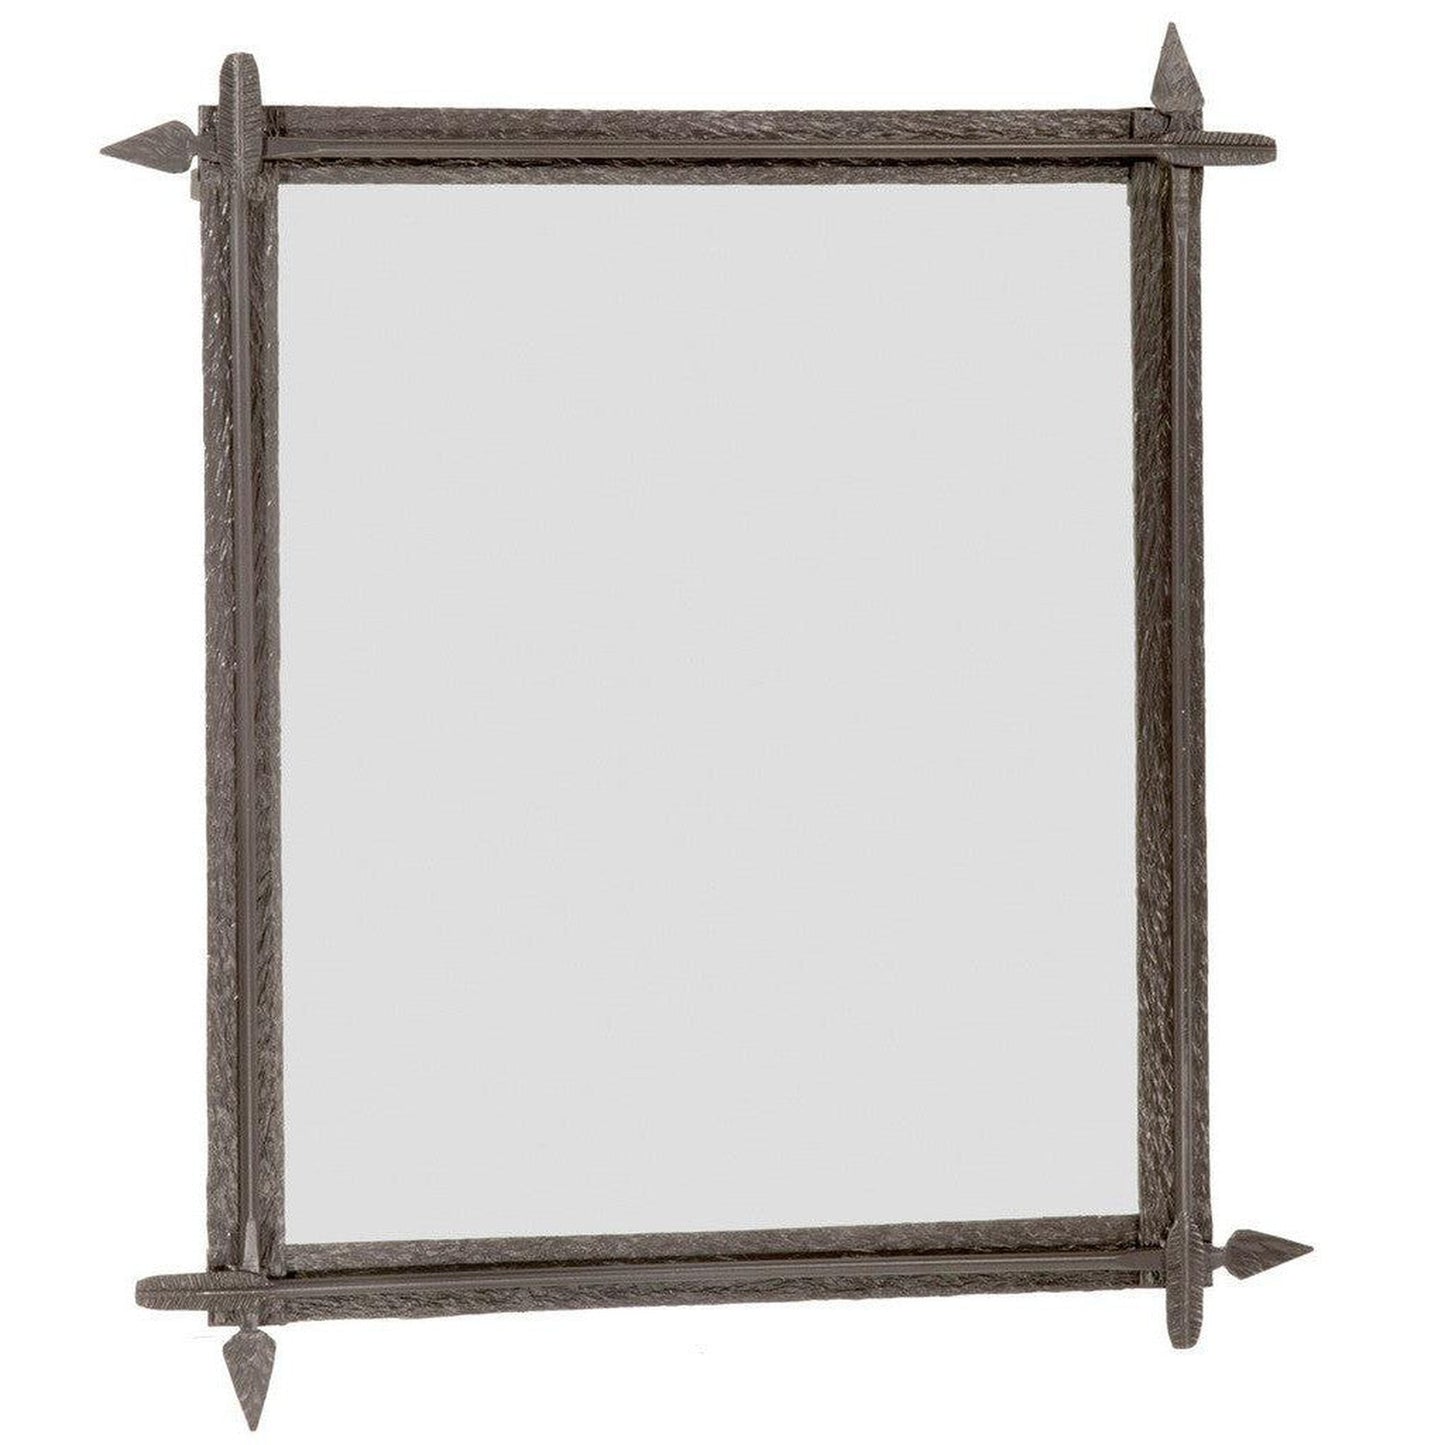 Stone County Ironworks Quapaw 31" x 43" Large Hand Rubbed Brass Iron Wall Mirror With Gold Iron Accent